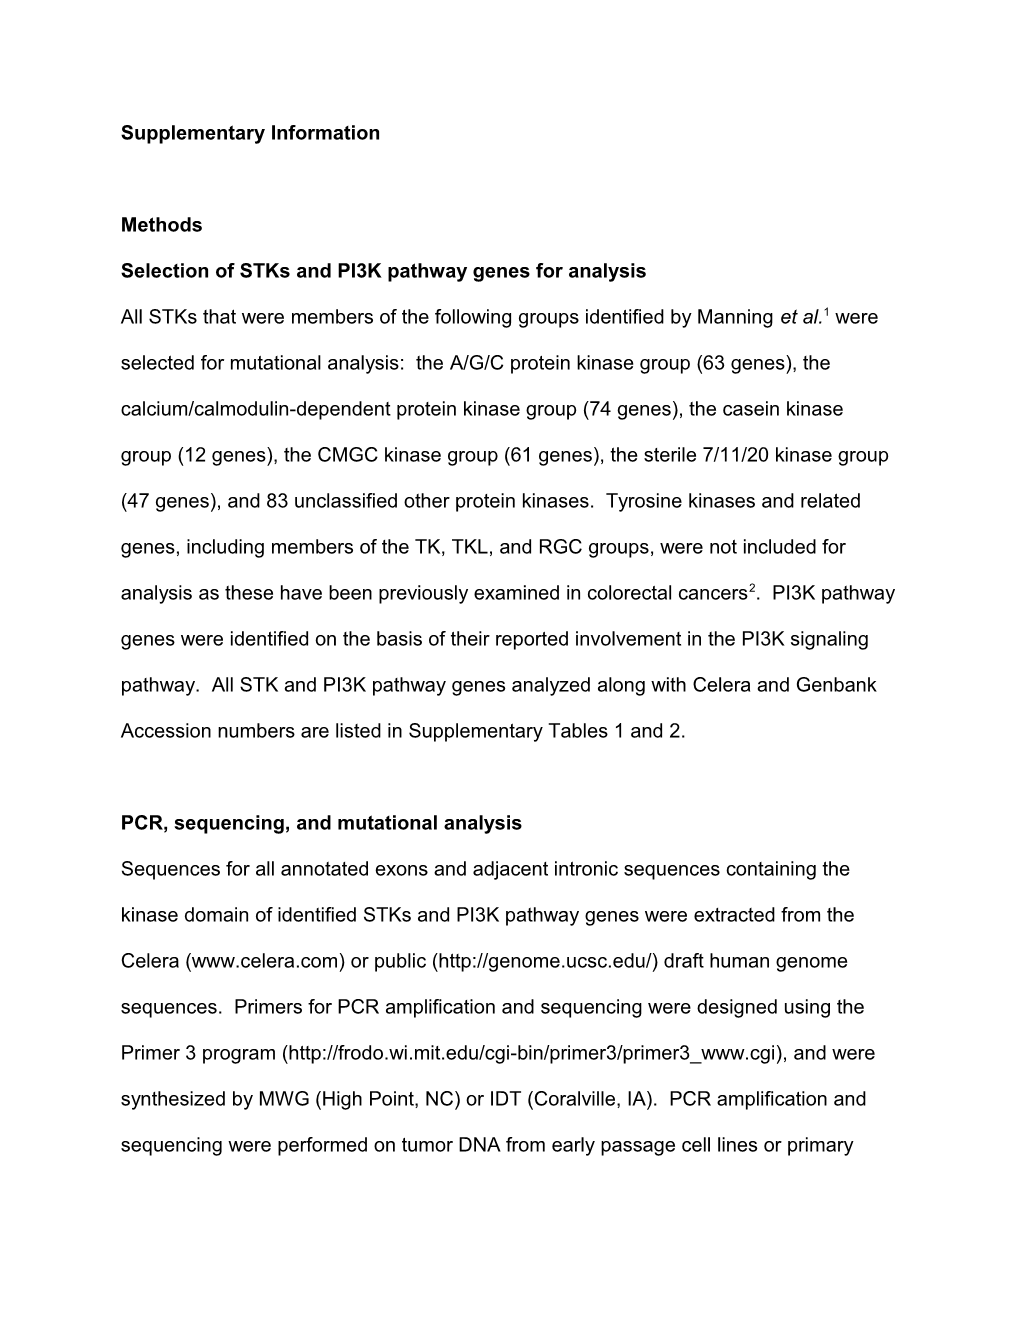 Selection of Stks and PI3K Pathway Genes for Analysis